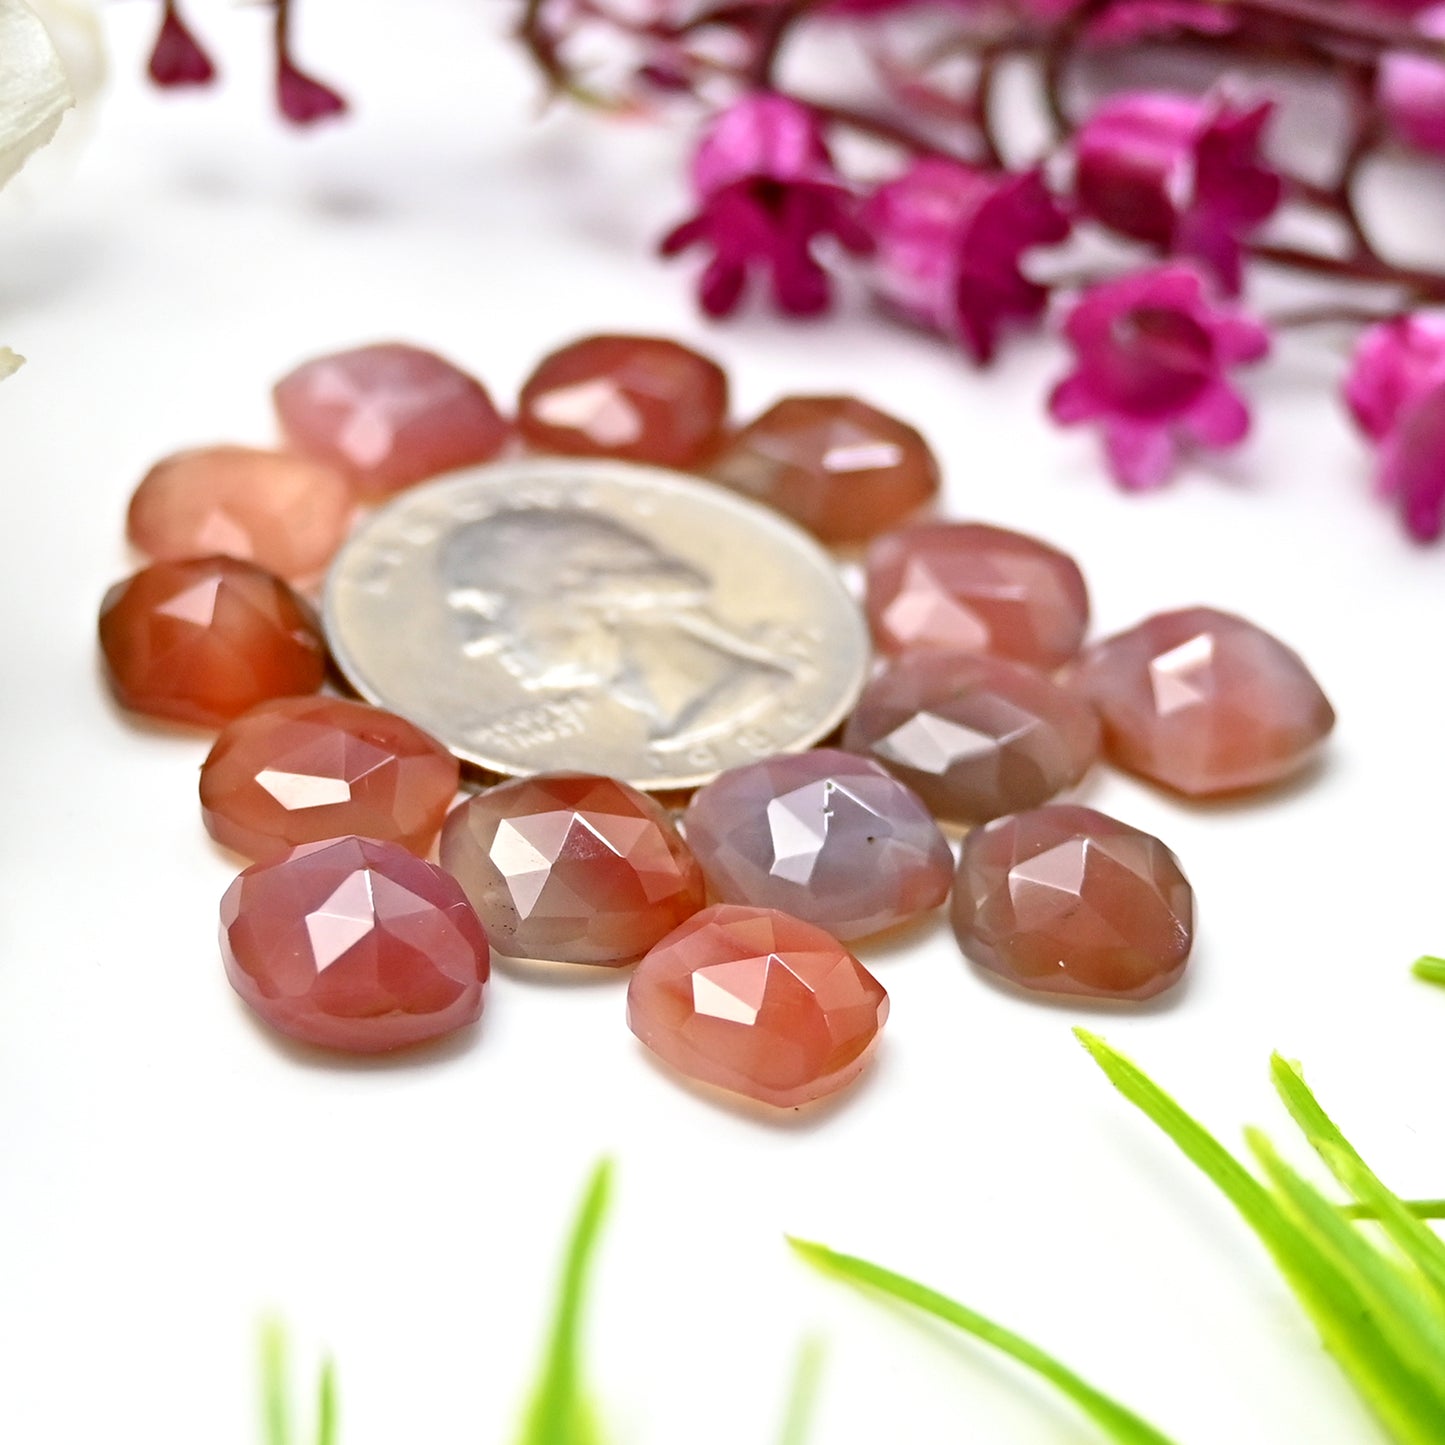 Calibrated Natural Botswana Agate Faceted Rose Cut Cabochon 9x9mm - 10x10mm